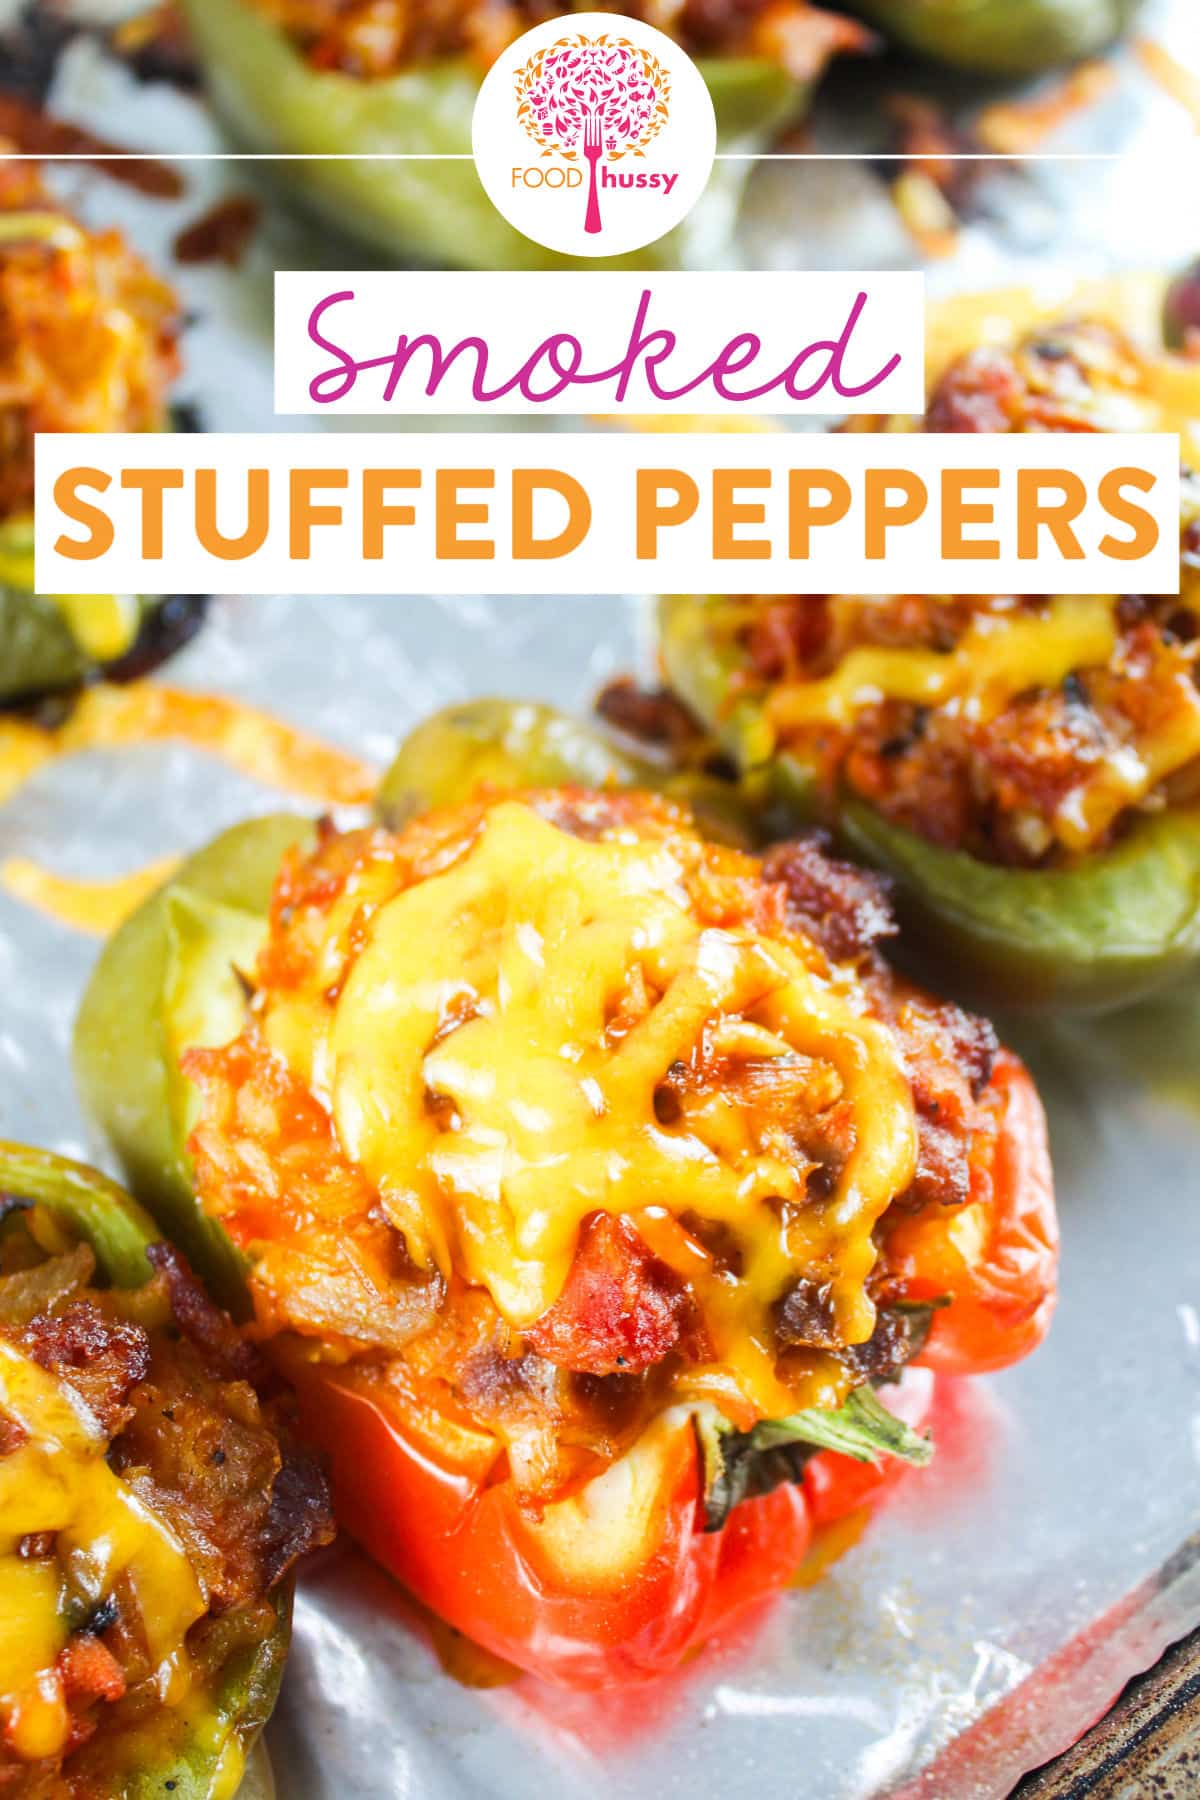 Smoked Stuffed Peppers are my favorite dinner because its a full meal in an edible bowl! Stuffed with sausage, rice, vegetables, rice and cheese - they take on a delicious smoky flavor from the Traeger! via @foodhussy